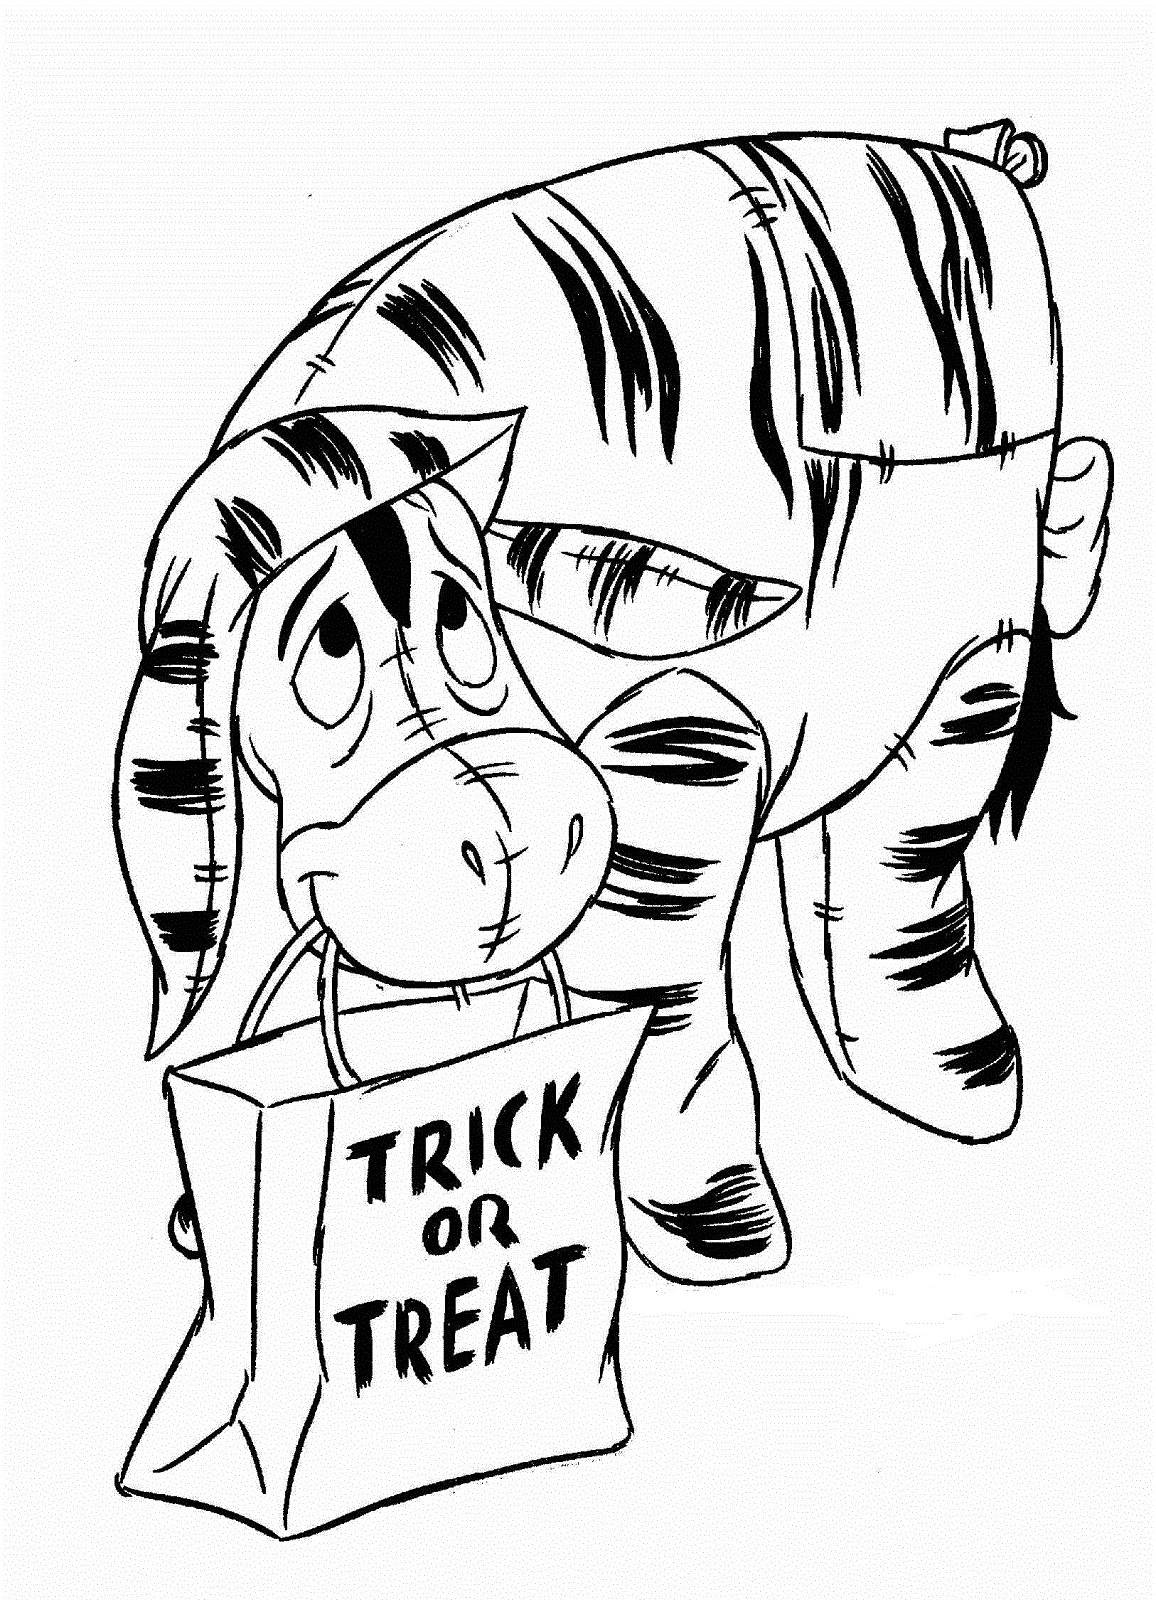 disney-halloween-coloring-pages-best-coloring-pages-for-kids